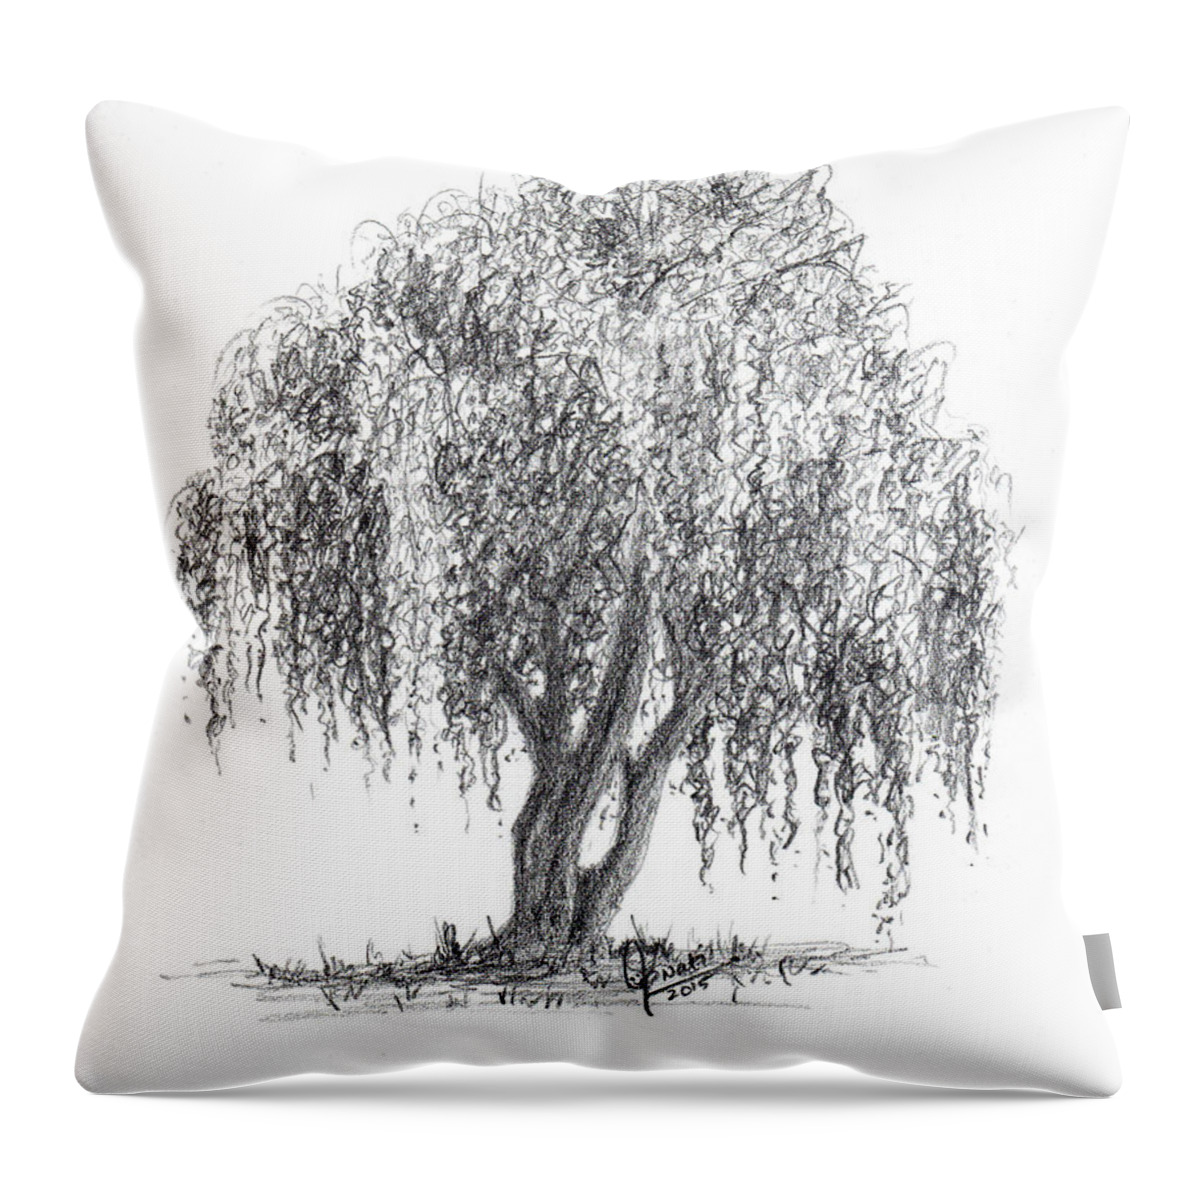 Weeping Willow Tree Throw Pillow For Sale By Swati Singh,Chicken Breast Temperature Celsius